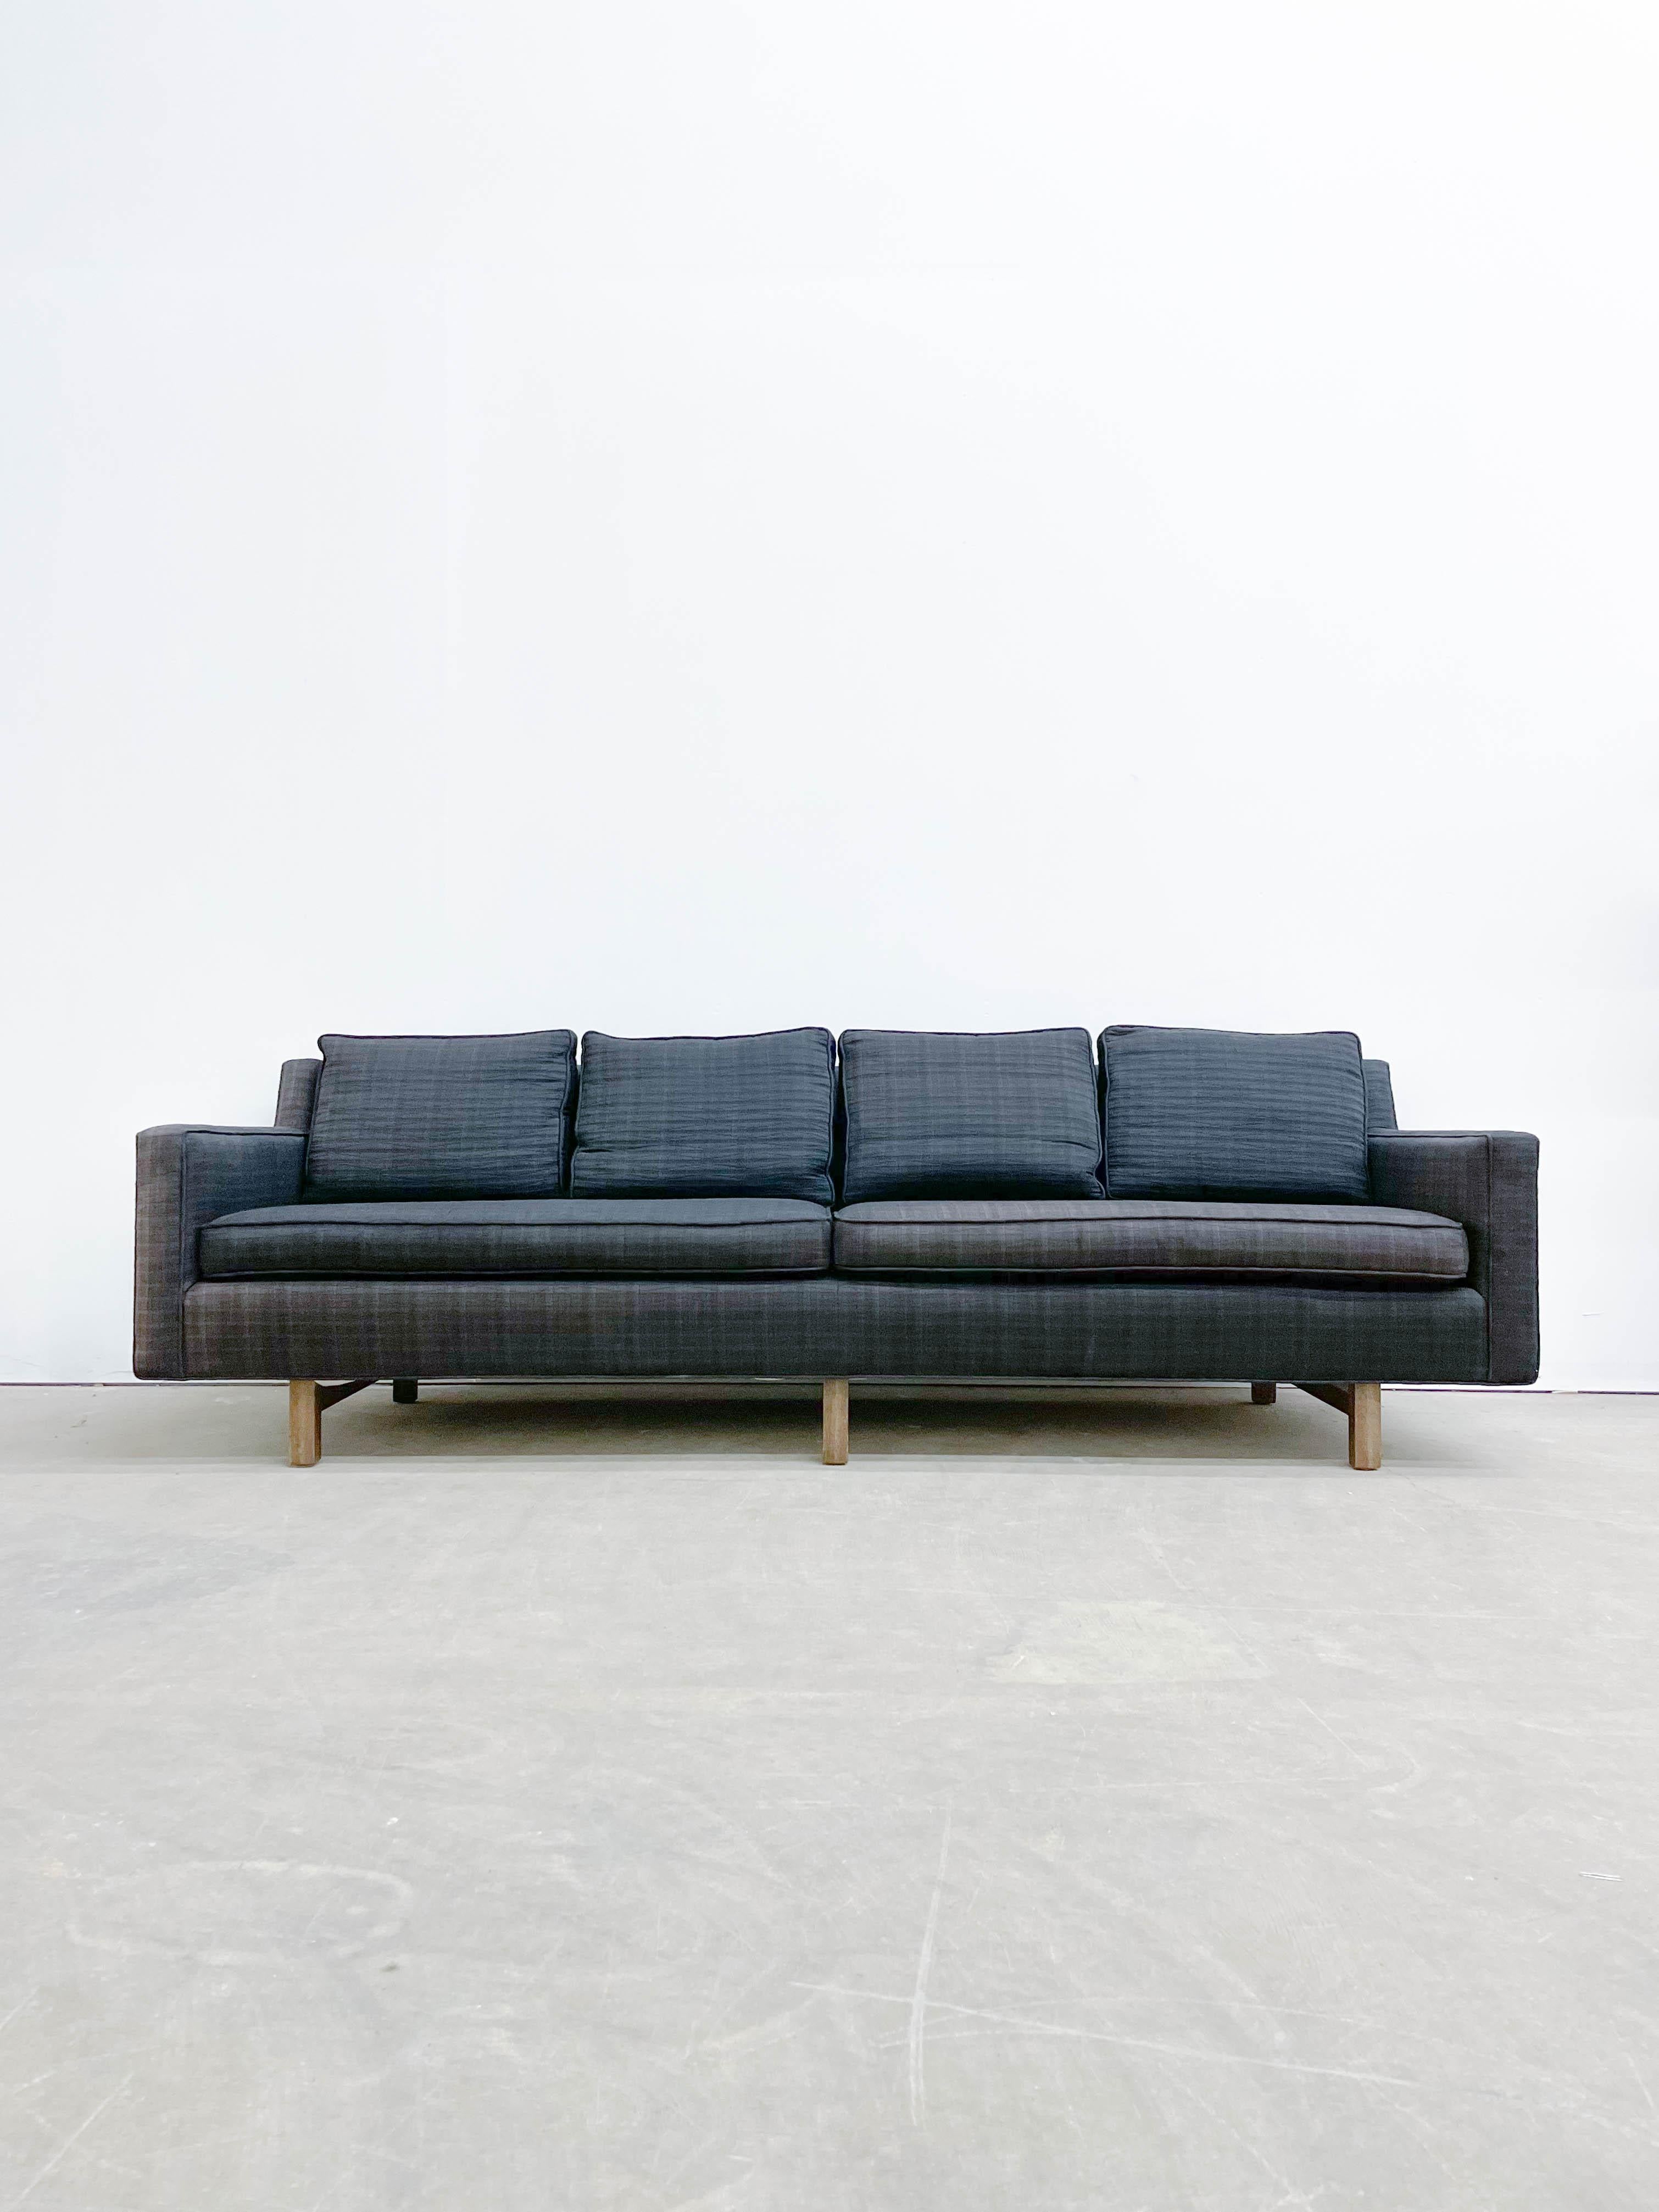 This sleek and classy sofa combines great modern looks with legendary Dunbar comfort. At 92” long it seats four people easily and looks great. The sofa is very sturdy and will likely continue to be a durable, stable, and attractive seating option